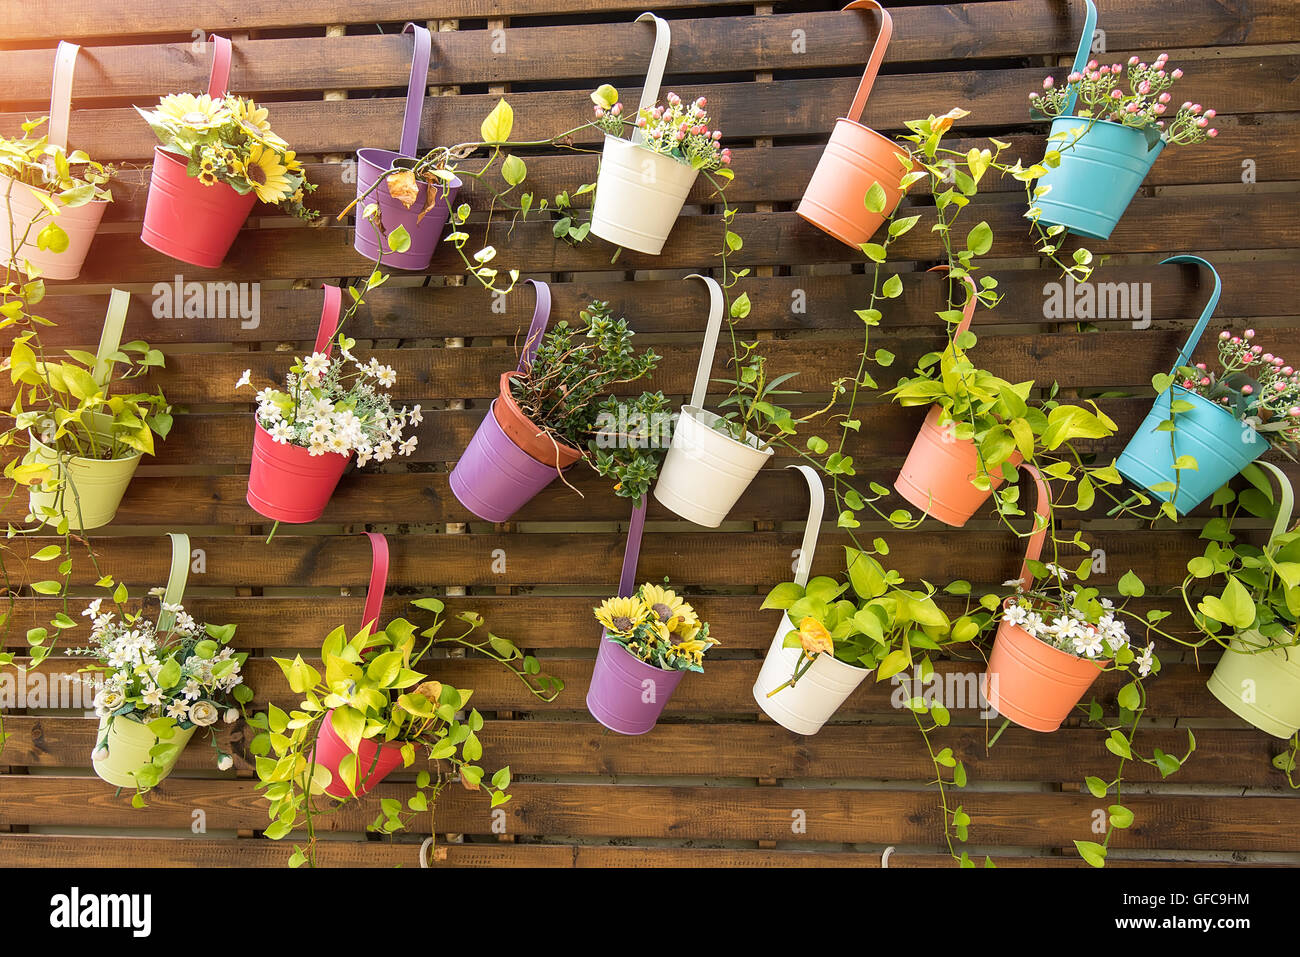 Hanging Flower Pots with fence Stock Photo - Alamy